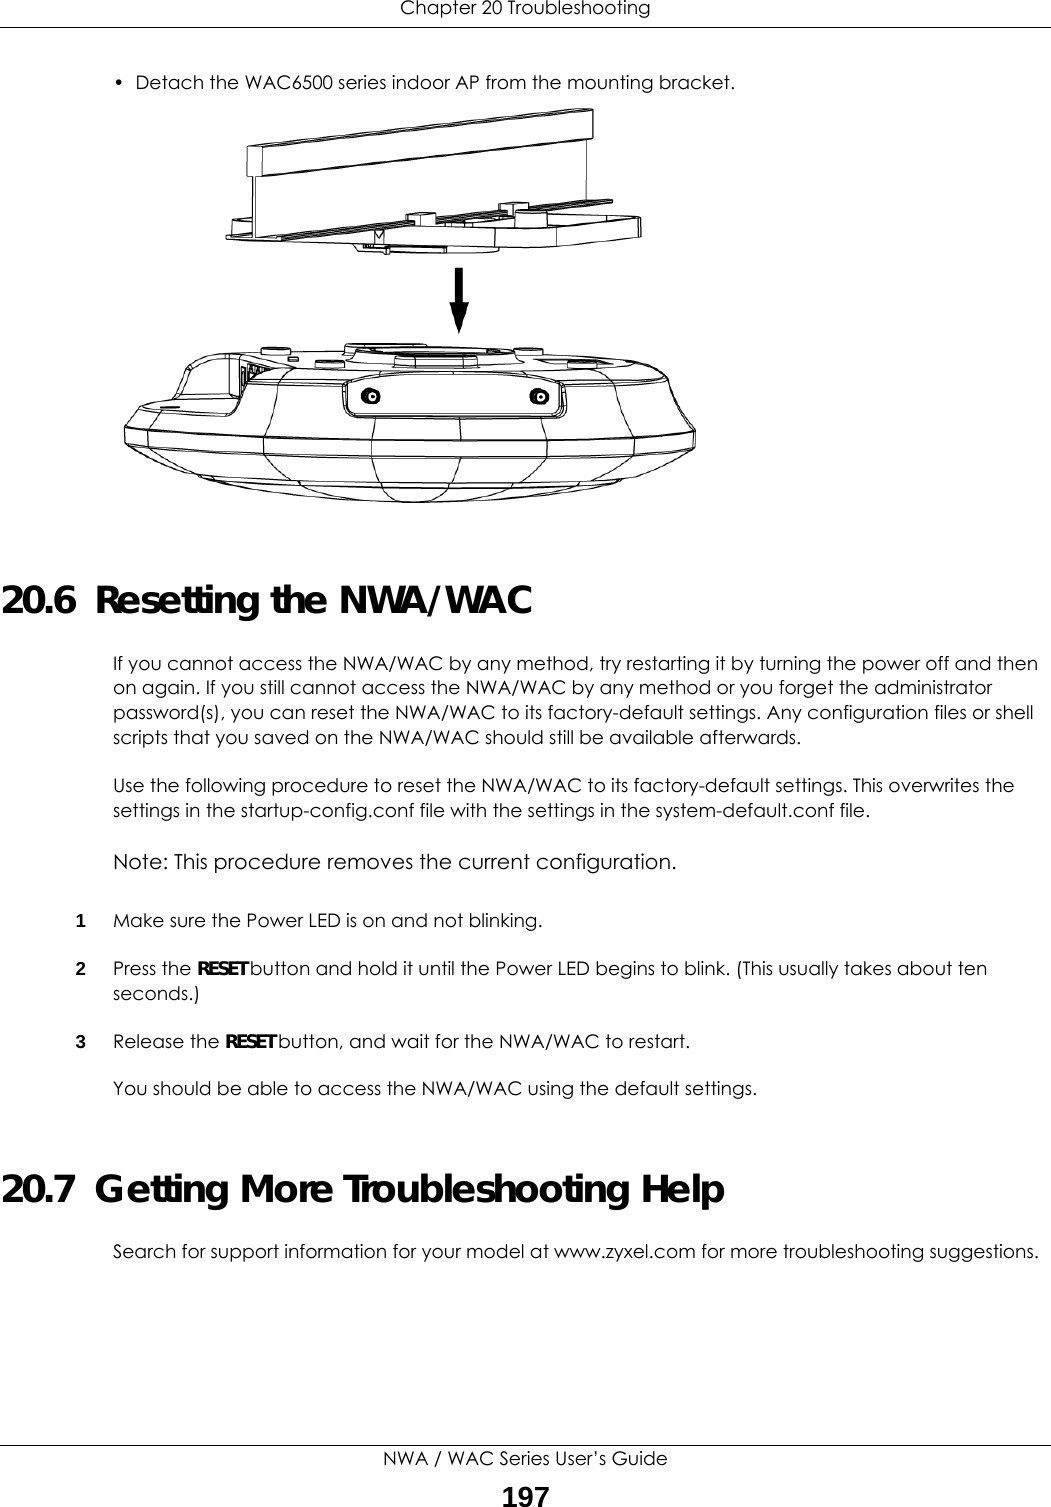 Chapter 20 TroubleshootingNWA / WAC Series User’s Guide197• Detach the WAC6500 series indoor AP from the mounting bracket.20.6  Resetting the NWA/WACIf you cannot access the NWA/WAC by any method, try restarting it by turning the power off and then on again. If you still cannot access the NWA/WAC by any method or you forget the administrator password(s), you can reset the NWA/WAC to its factory-default settings. Any configuration files or shell scripts that you saved on the NWA/WAC should still be available afterwards.Use the following procedure to reset the NWA/WAC to its factory-default settings. This overwrites the settings in the startup-config.conf file with the settings in the system-default.conf file. Note: This procedure removes the current configuration. 1Make sure the Power LED is on and not blinking.2Press the RESET button and hold it until the Power LED begins to blink. (This usually takes about ten seconds.)3Release the RESET button, and wait for the NWA/WAC to restart.You should be able to access the NWA/WAC using the default settings.20.7  Getting More Troubleshooting HelpSearch for support information for your model at www.zyxel.com for more troubleshooting suggestions.